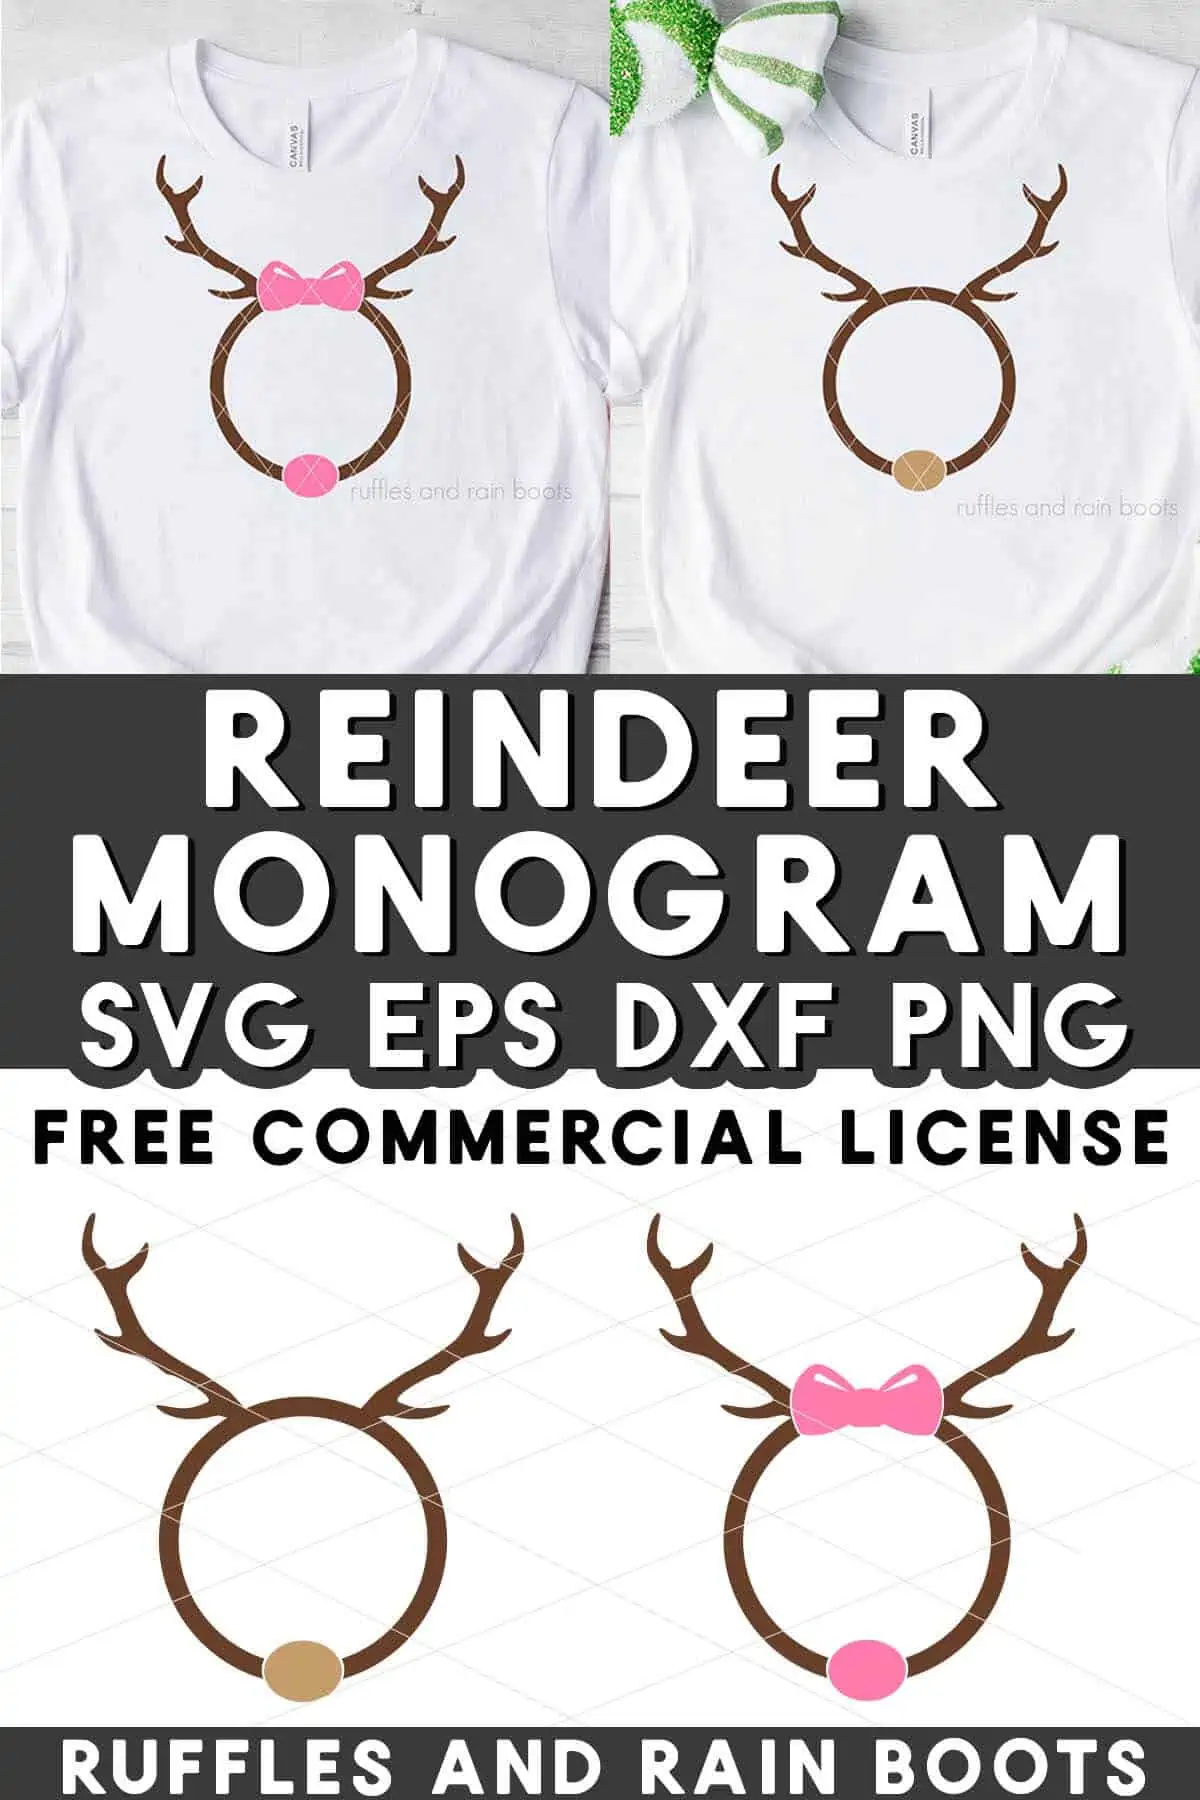 Stacked image of two white t-shirts with reindeer monogram in vinyl with text which reads reindeer monogram SVG with free commercial license.